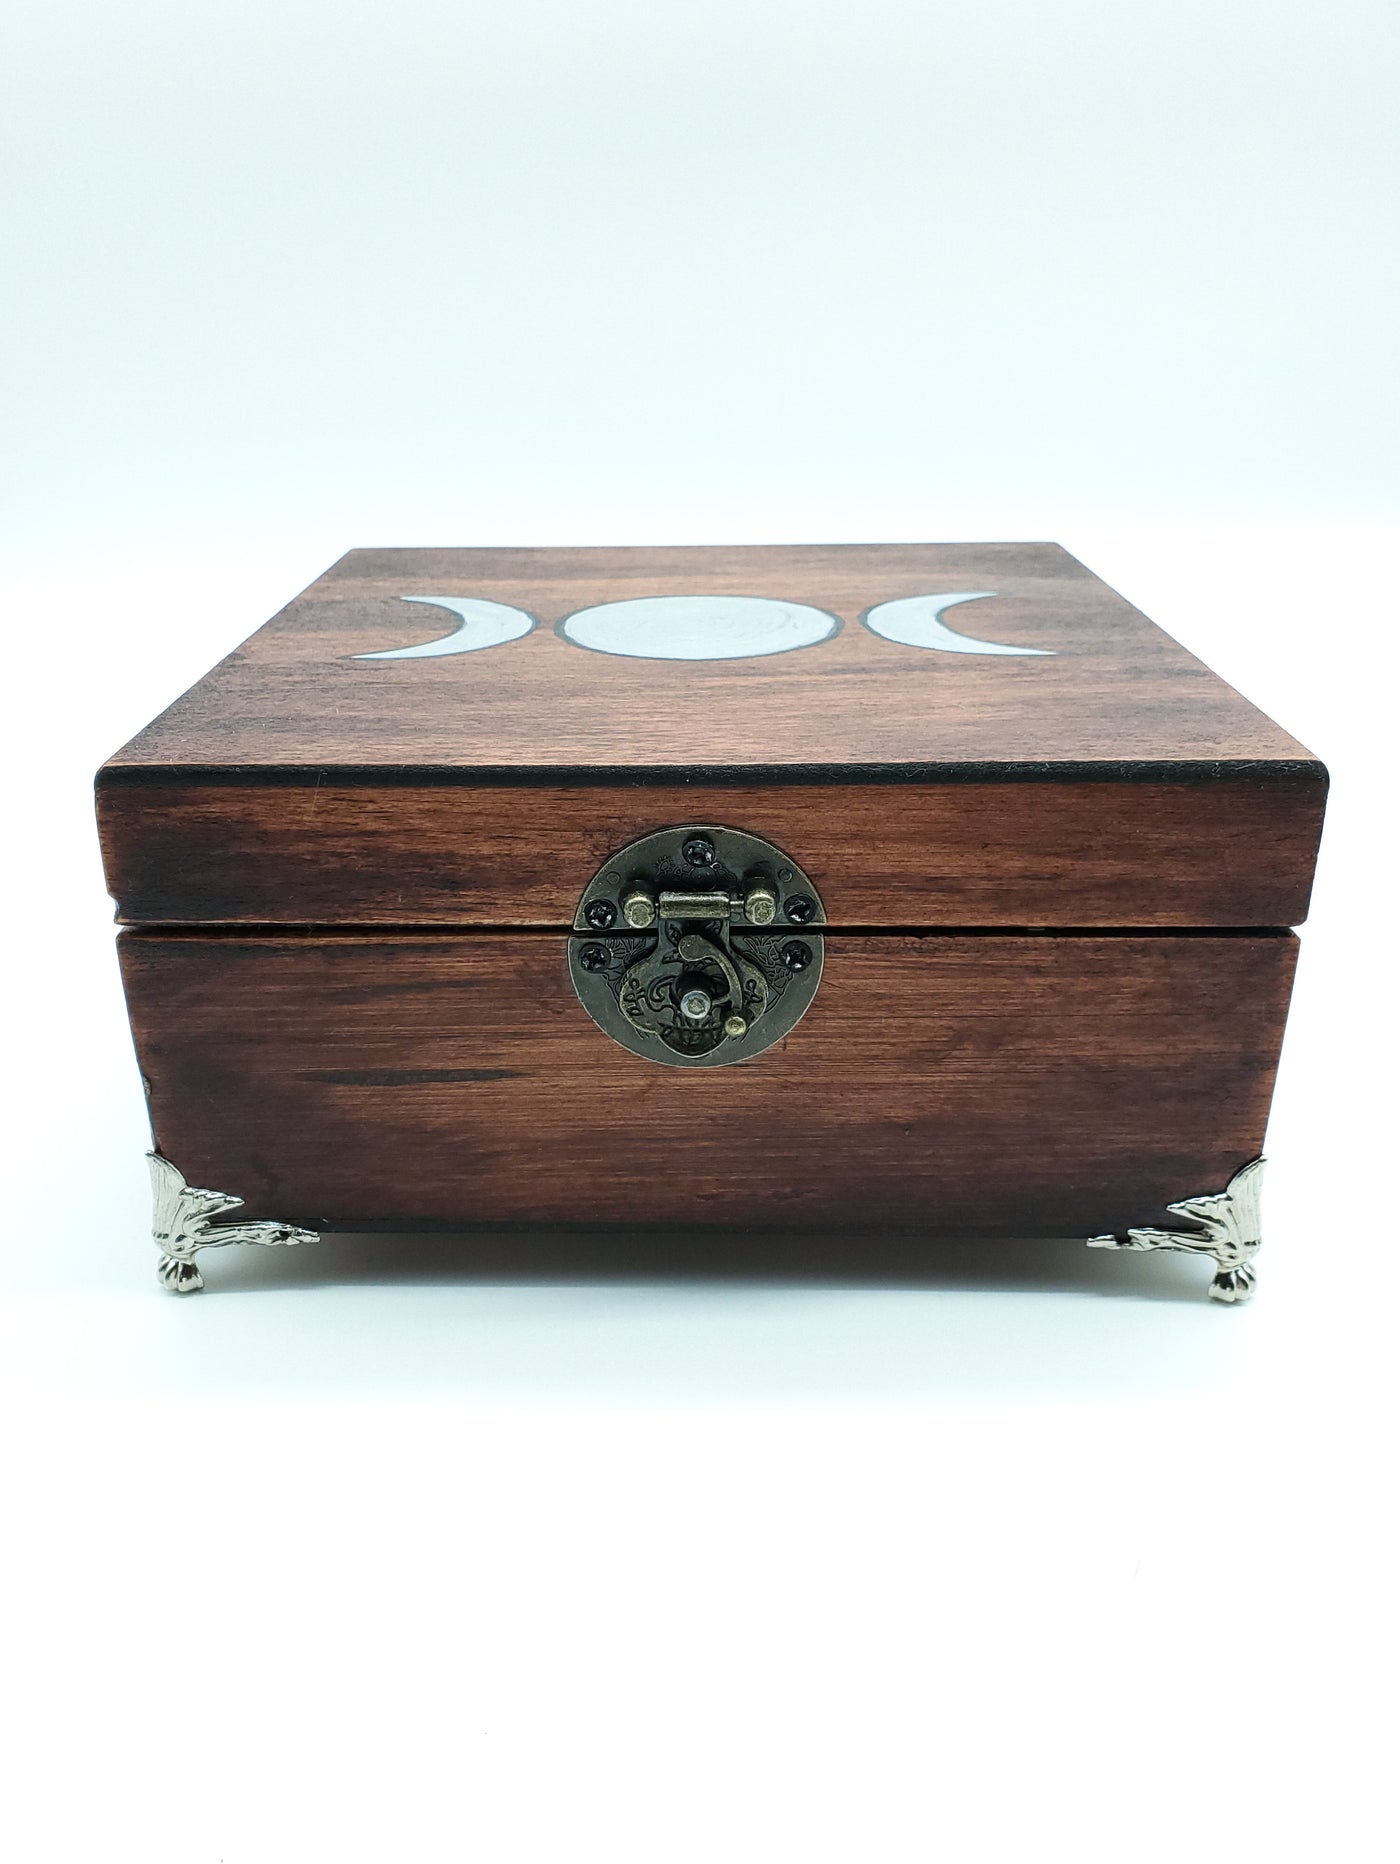 Moon Phase Divided Oils/Jewelry Box – The Caffeinated Raven